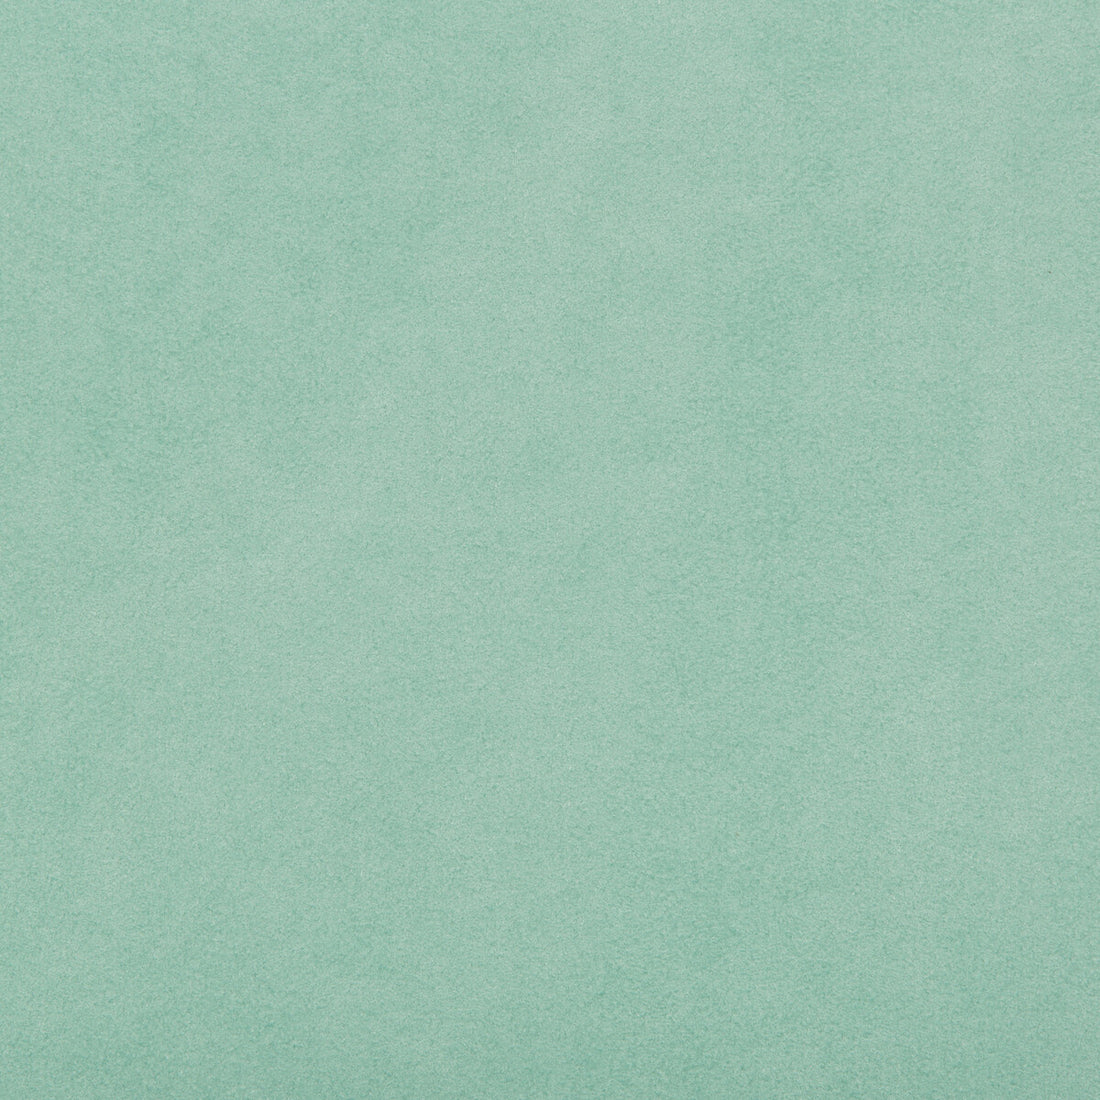 Ultrasuede Green fabric in seafoam color - pattern 30787.113.0 - by Kravet Design in the Performance collection